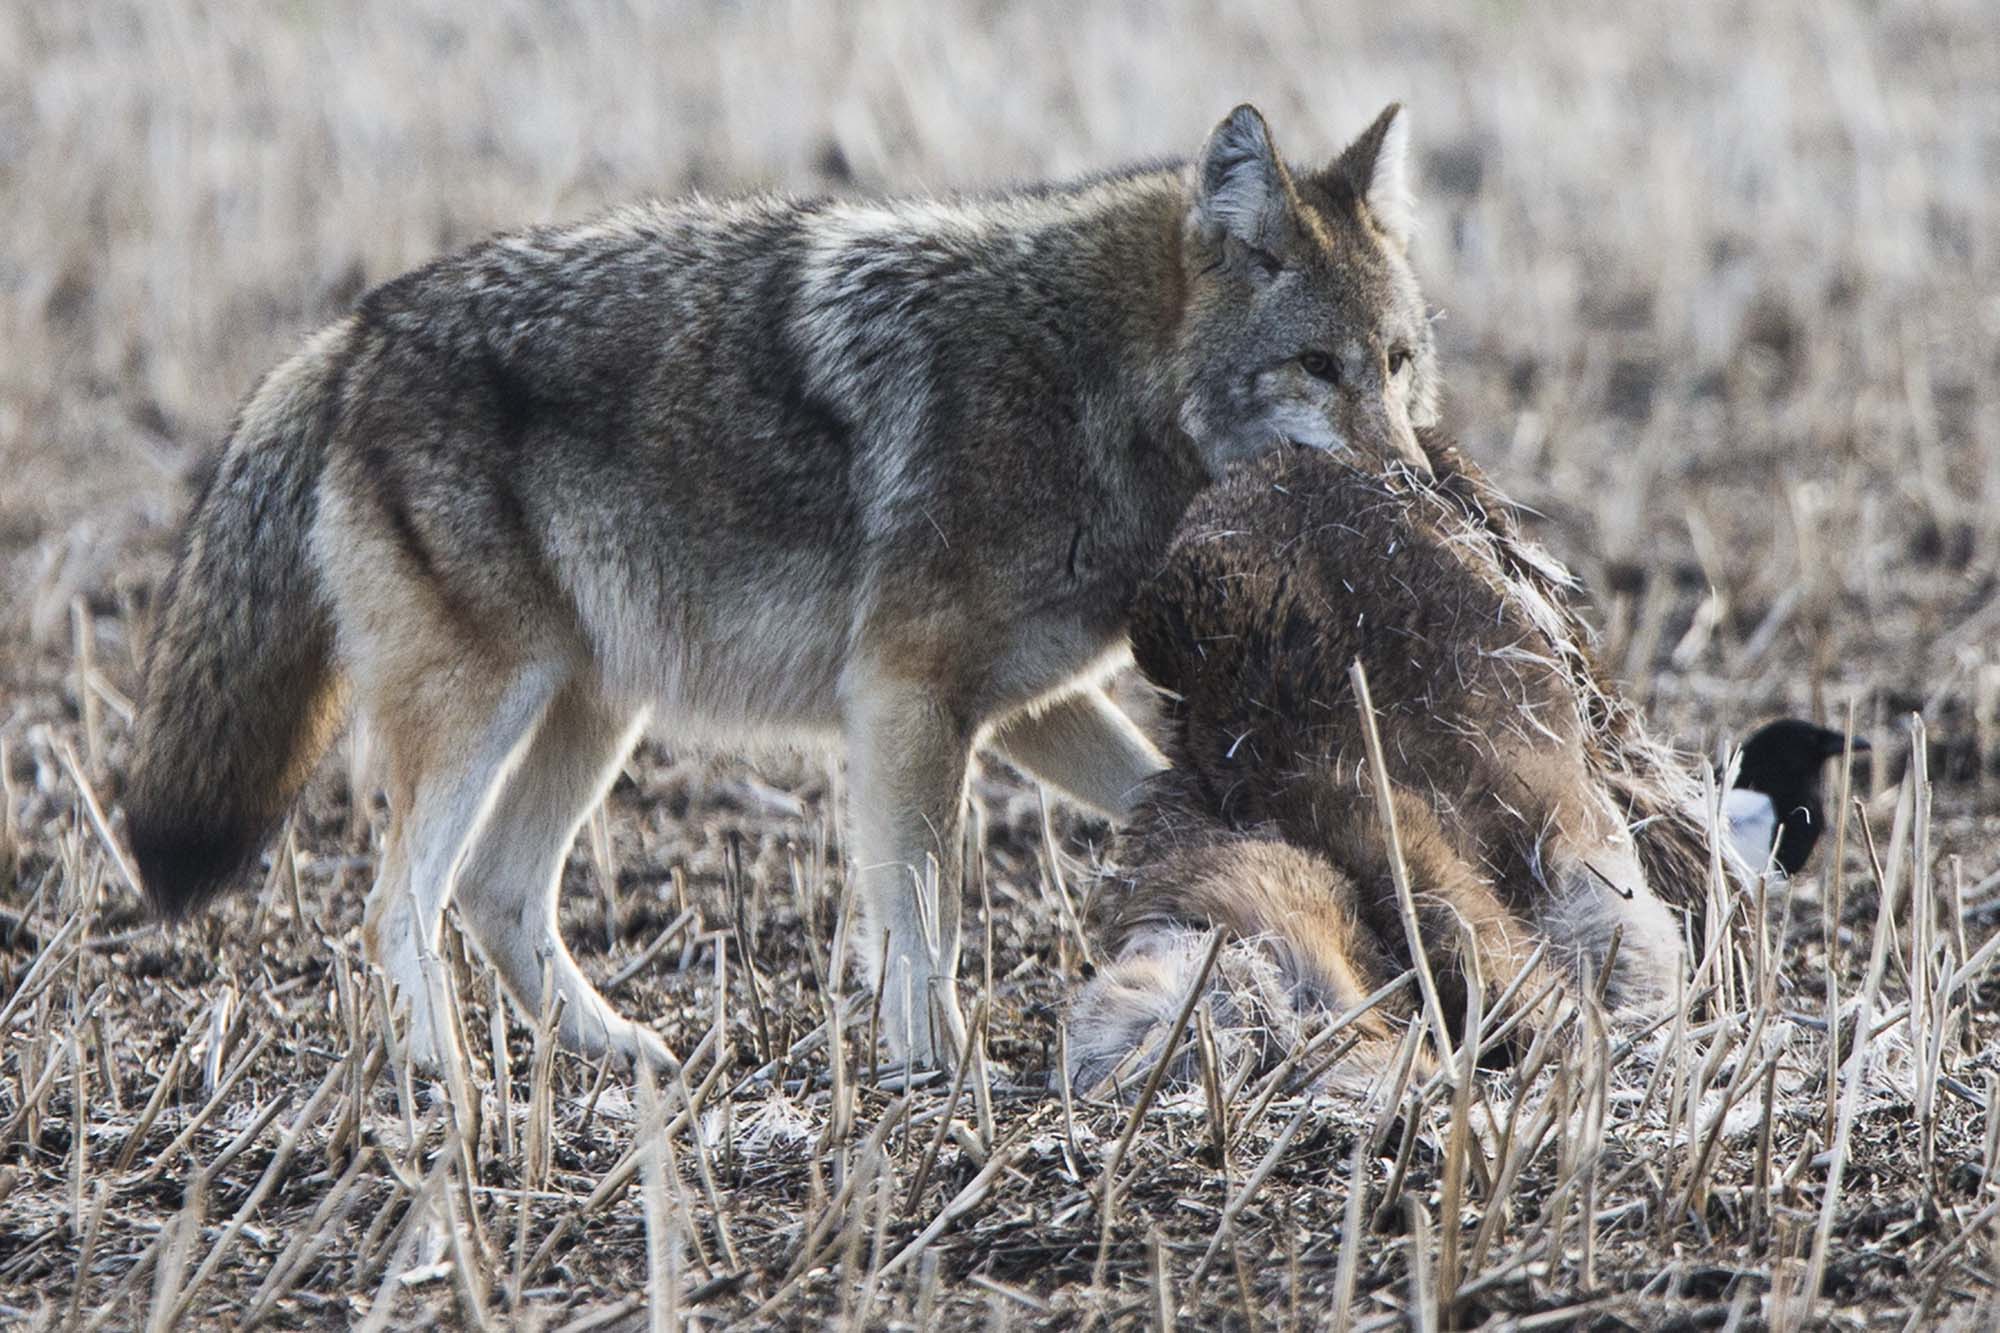 do coyotes eat dogs